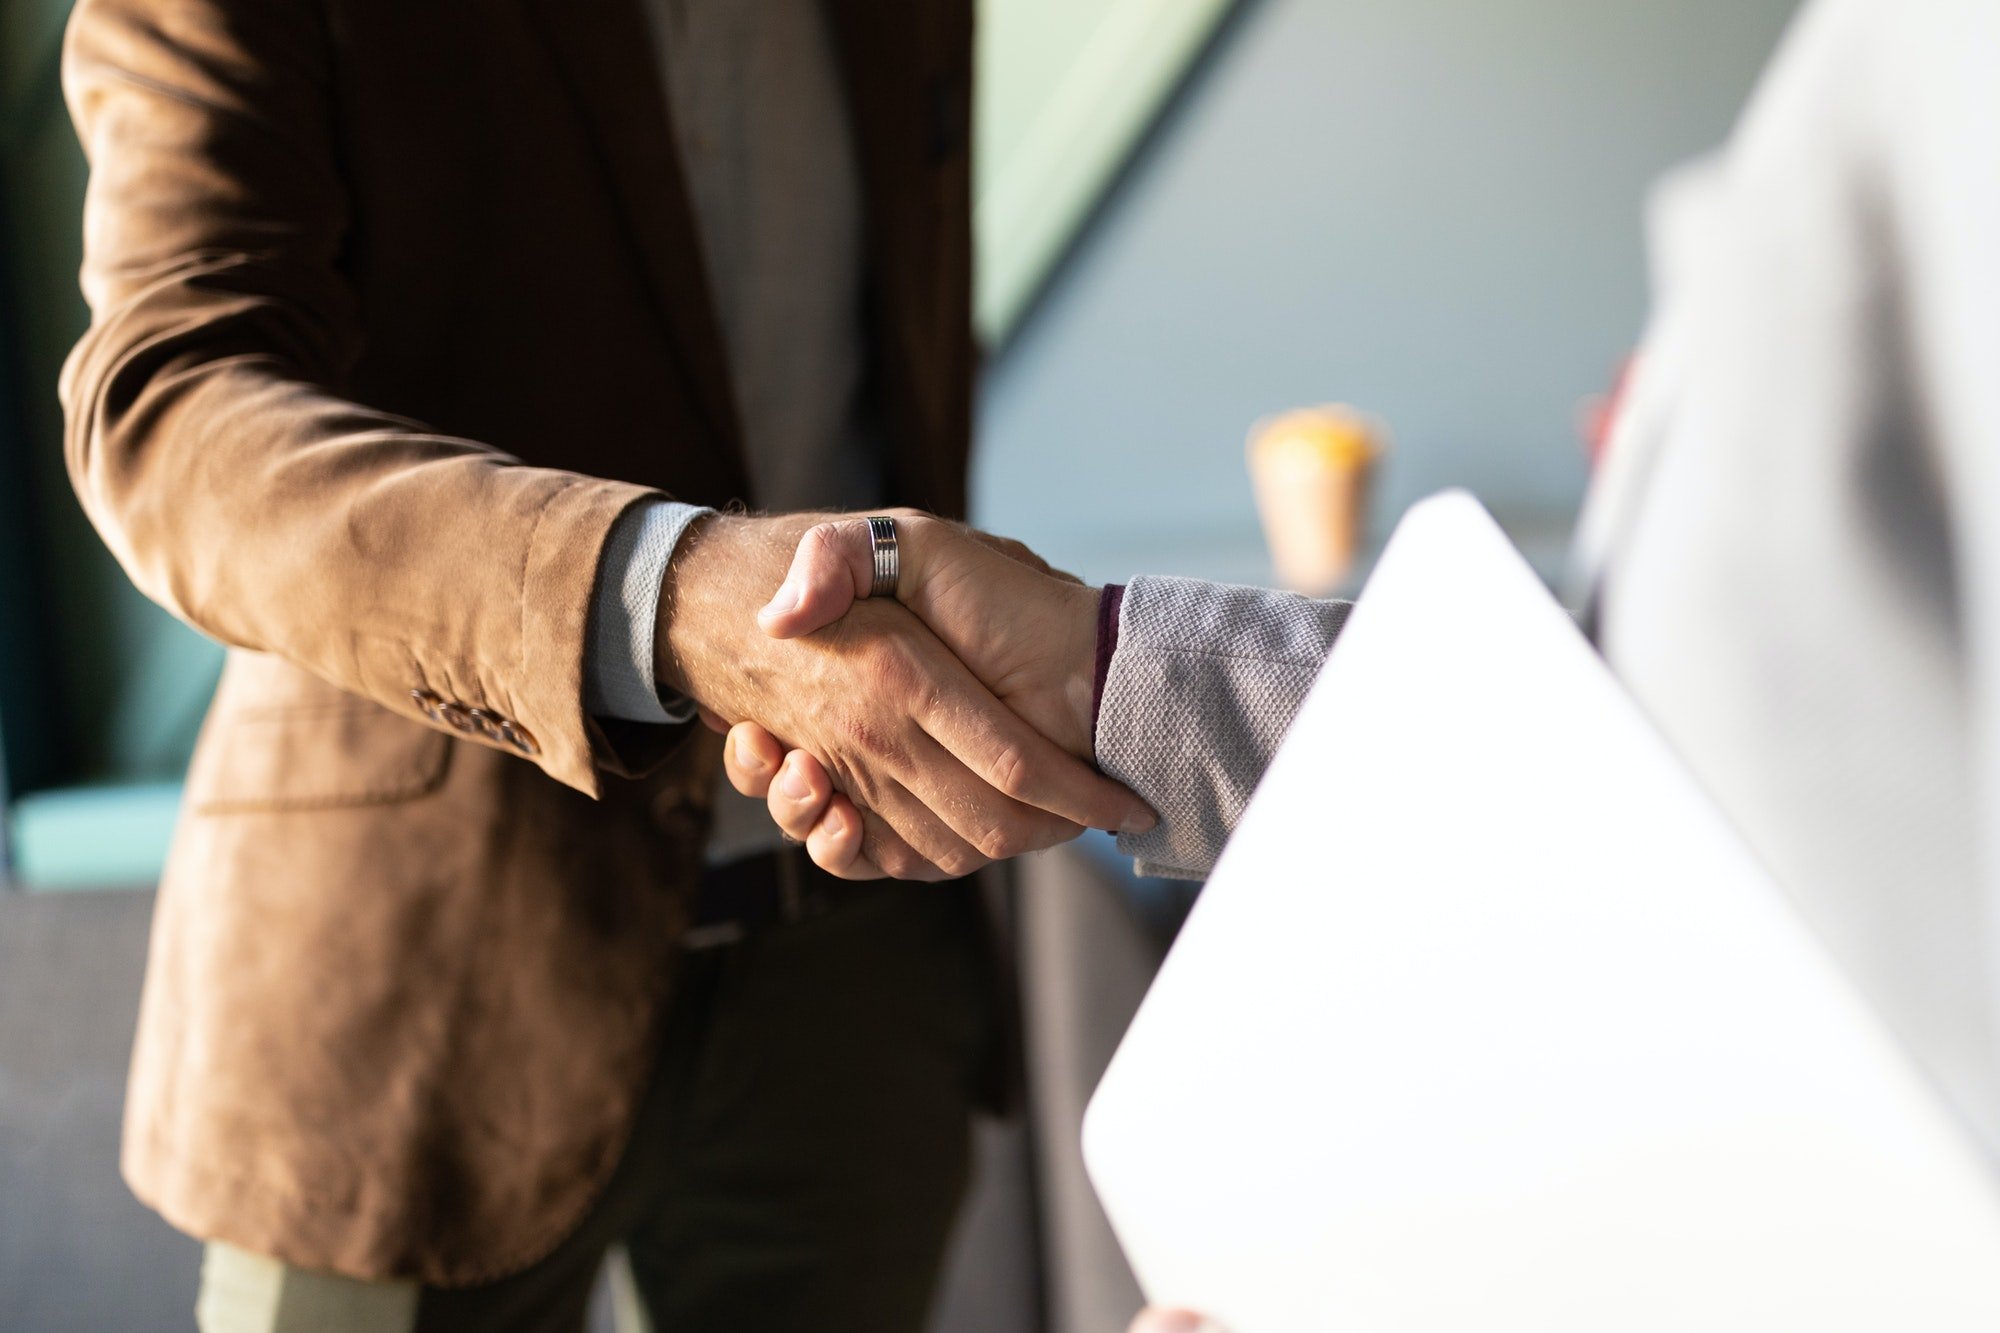 Business handshake and business people concept. Partnership, deal, agreement